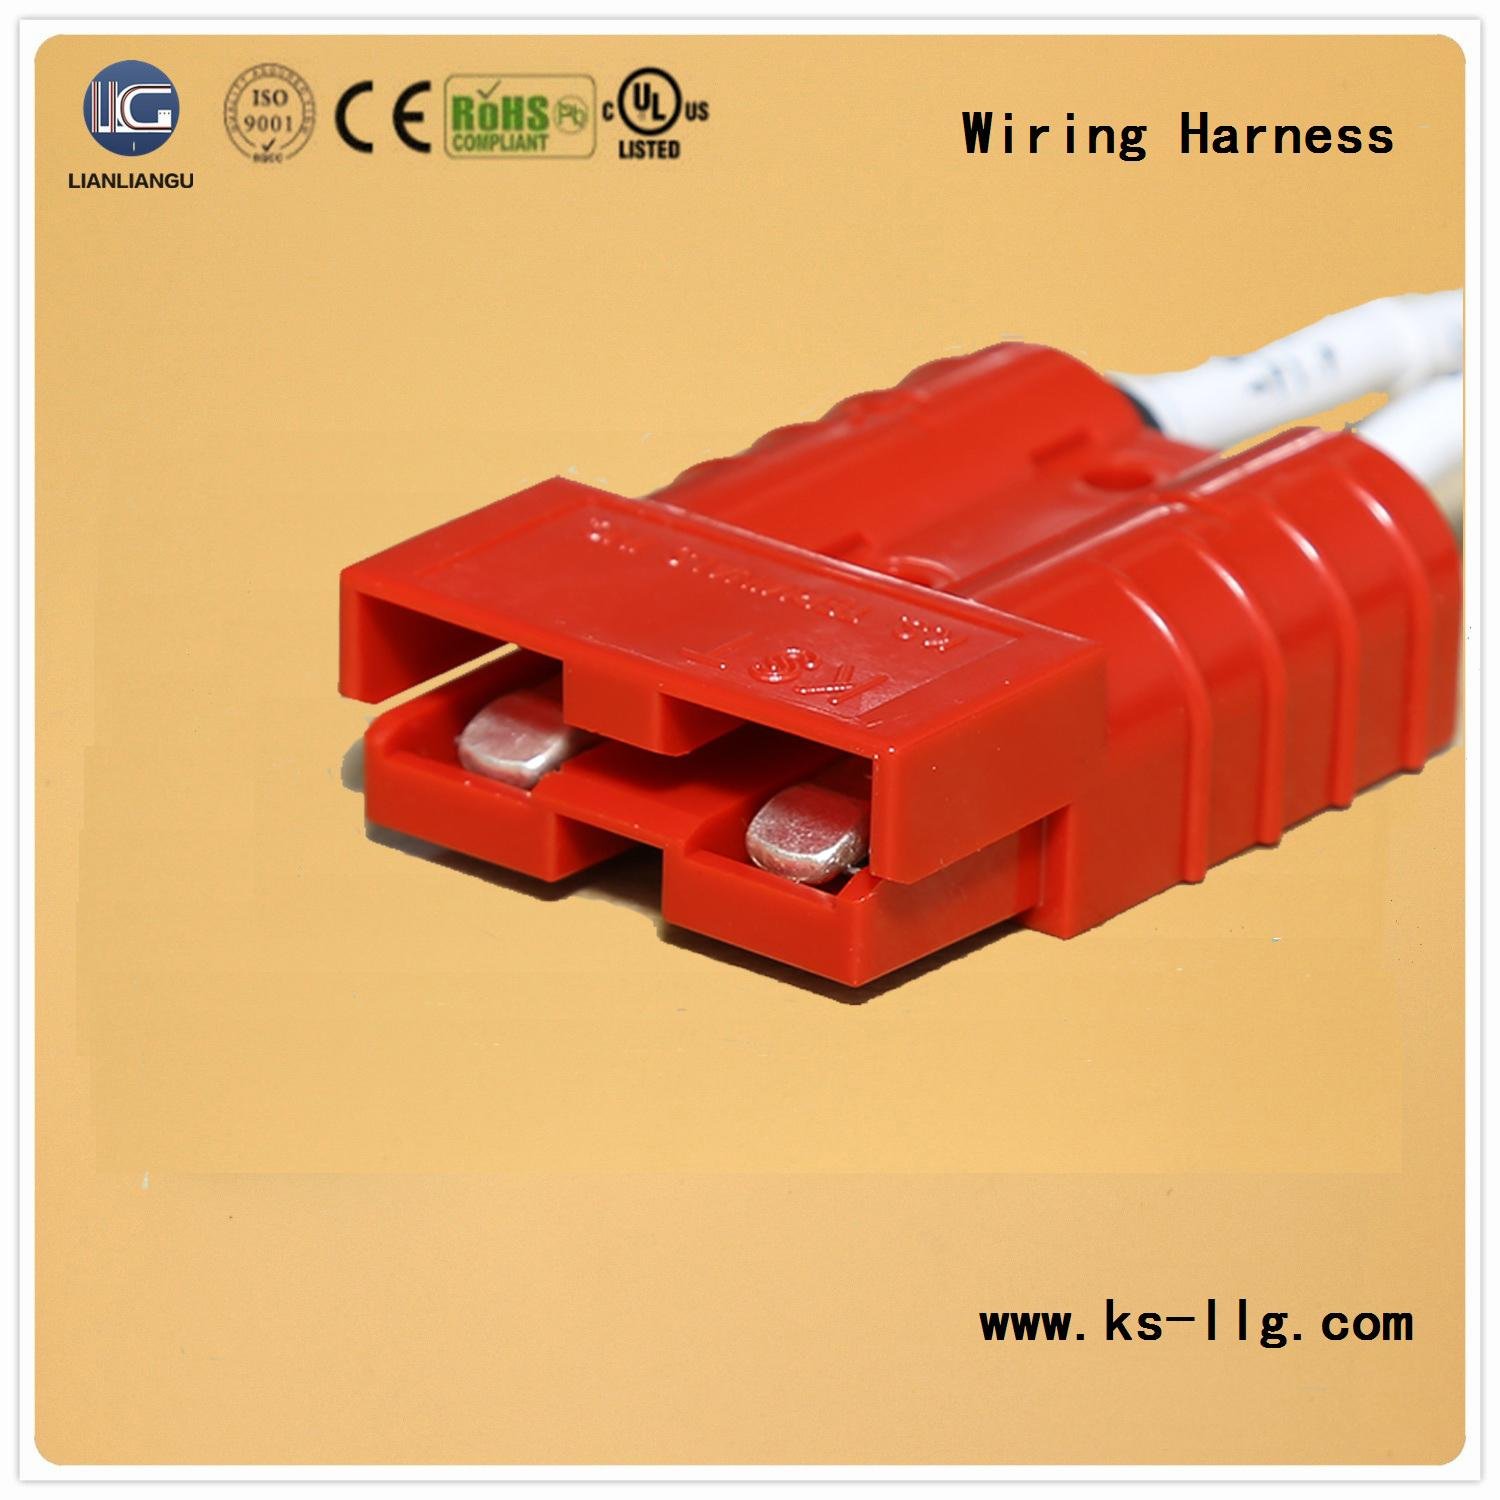 Coaxial Cable Wholesale Price for Network, Security Monitoring, Control Systems. 4